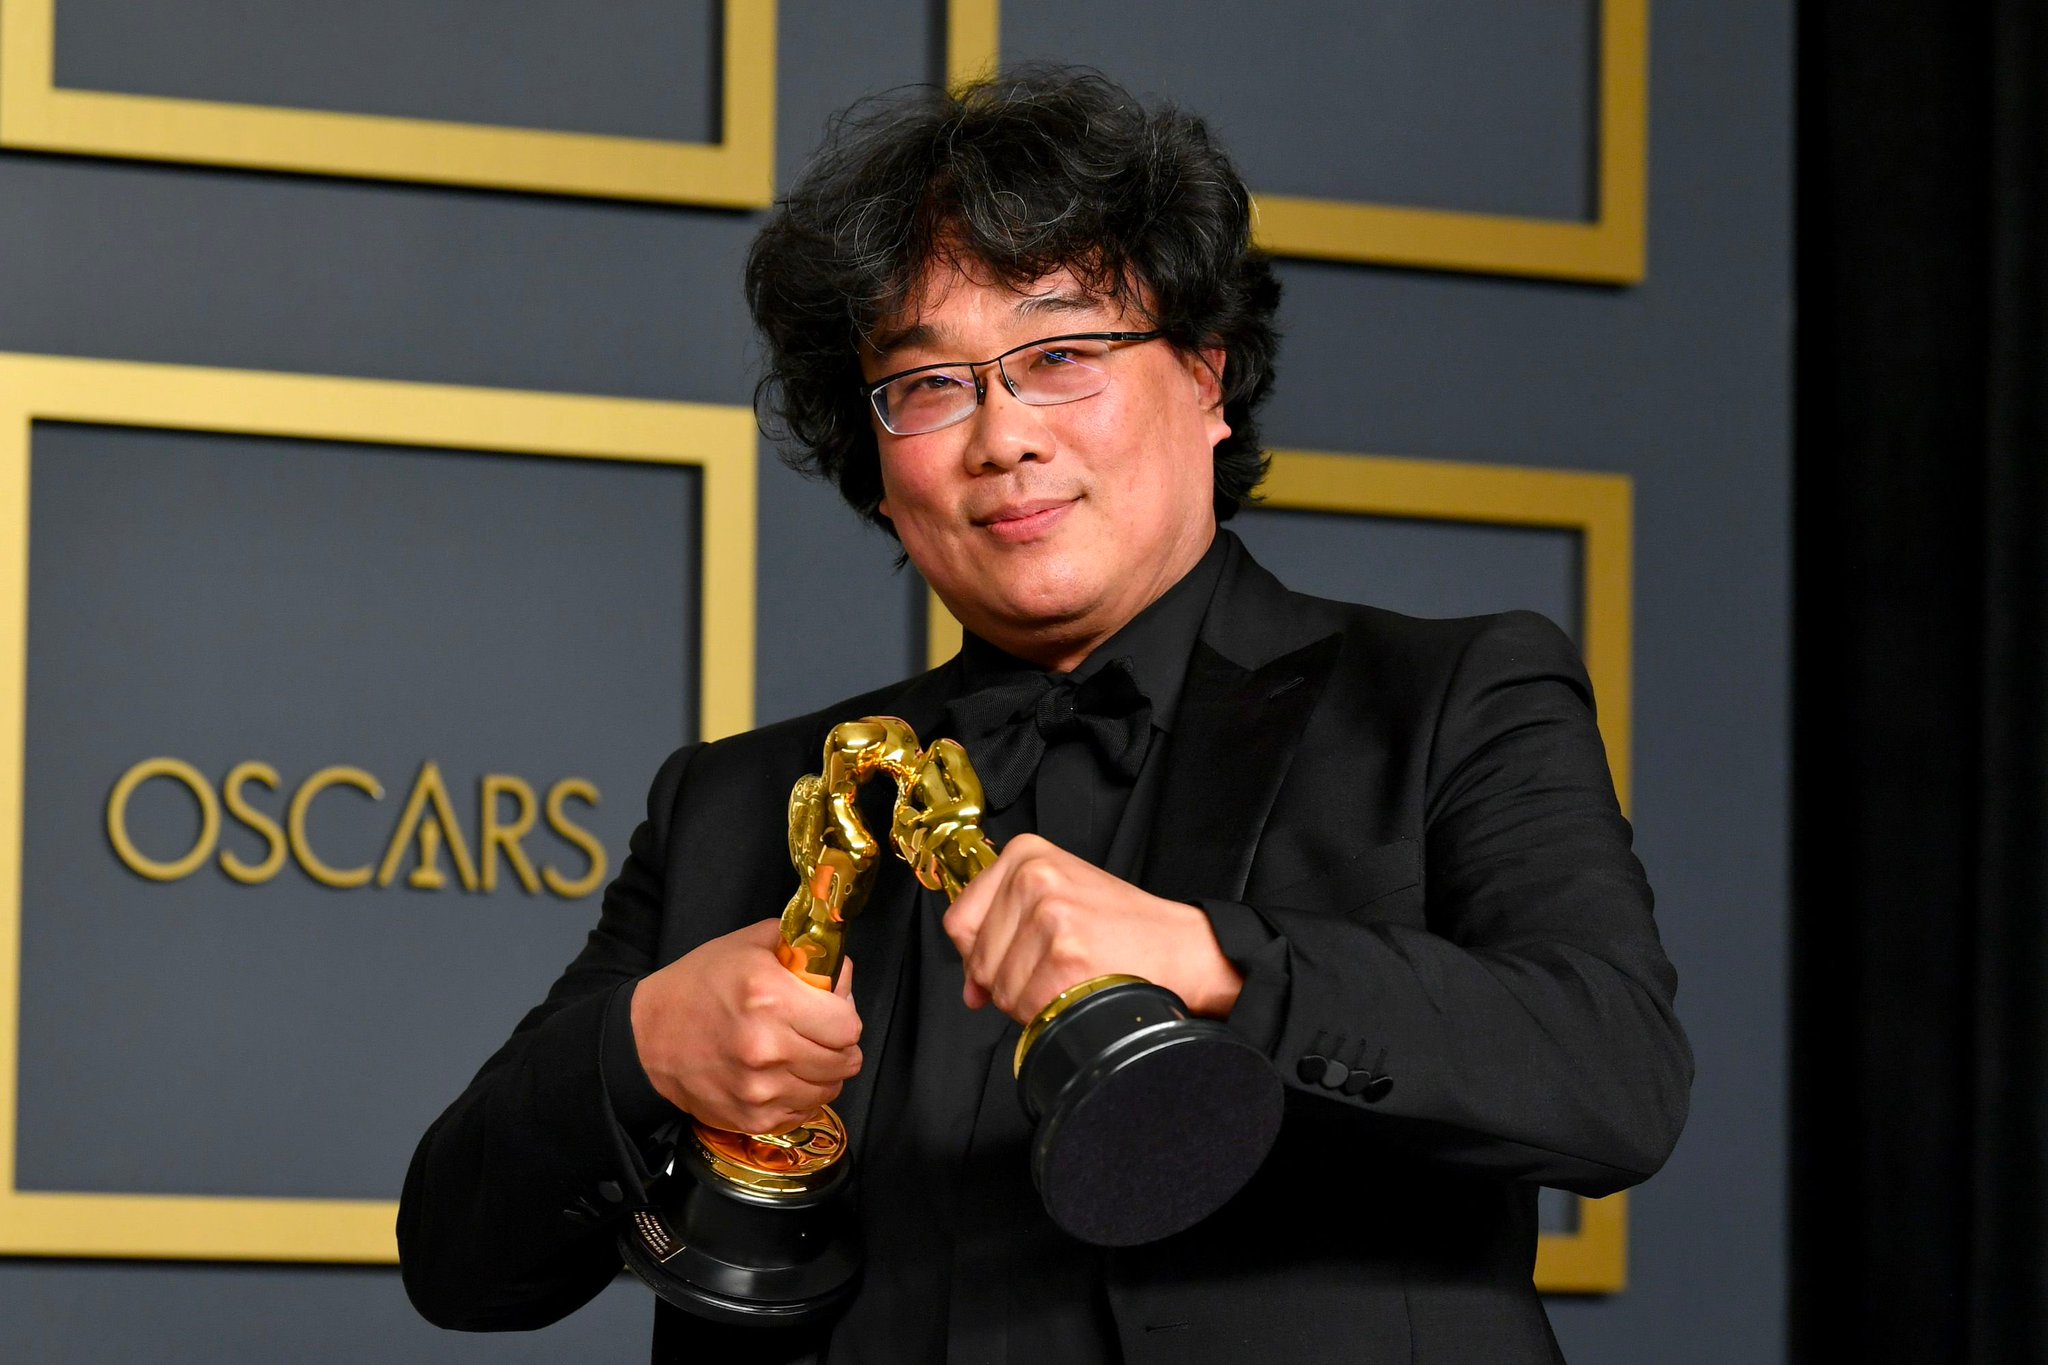 Happy birthday Bong Joon-ho! May the years ahead be filled with many more amazing films   